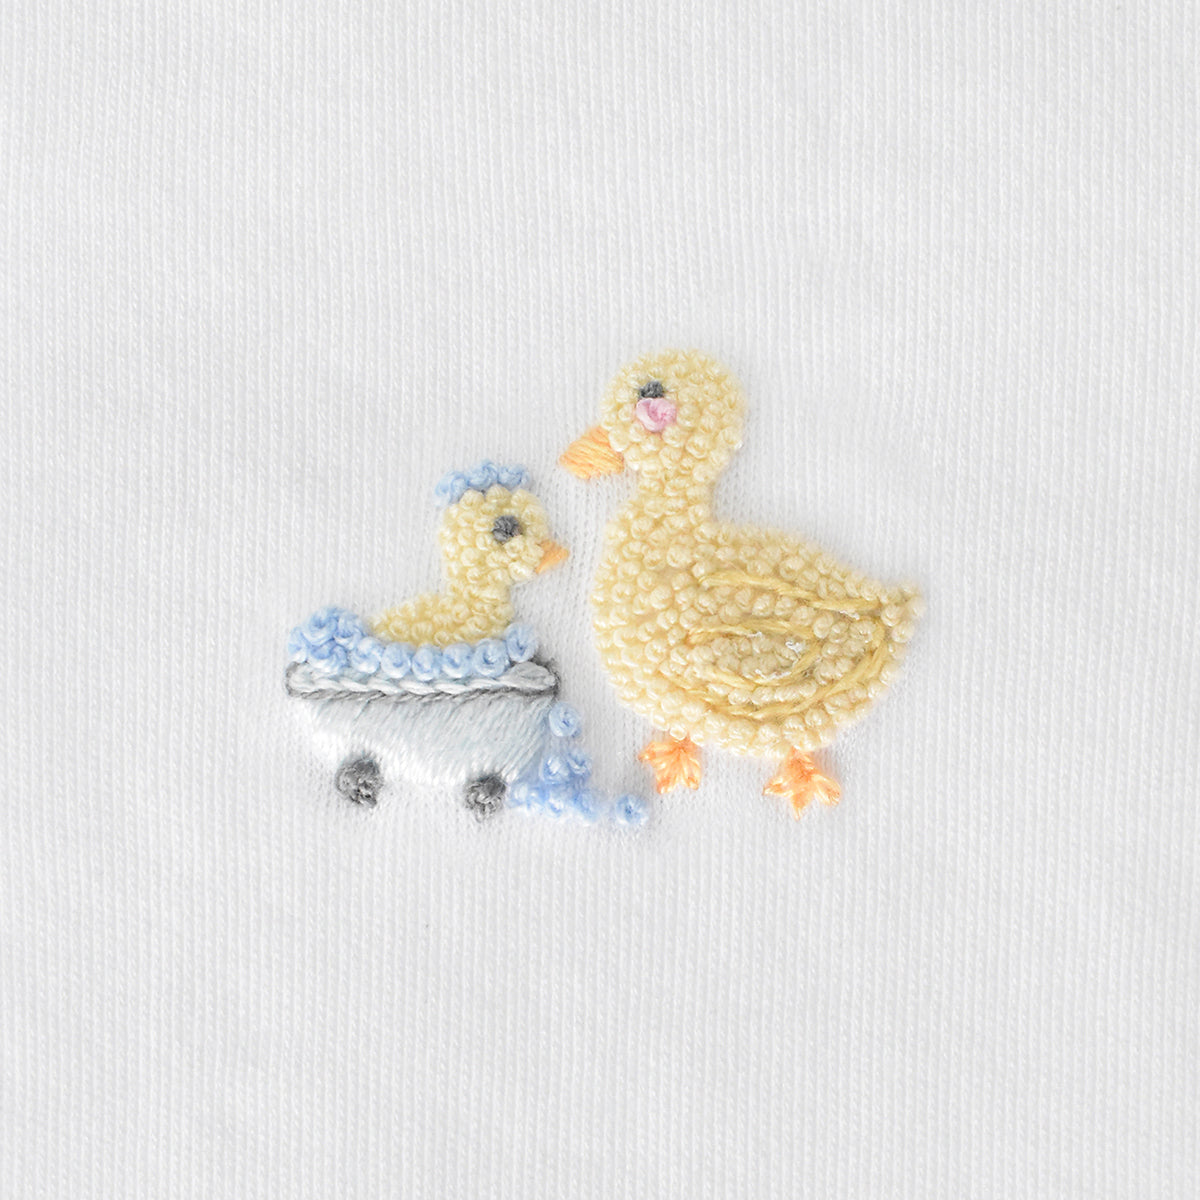 Bath Time Embroidery and Printed Blanket | Baby Unisex